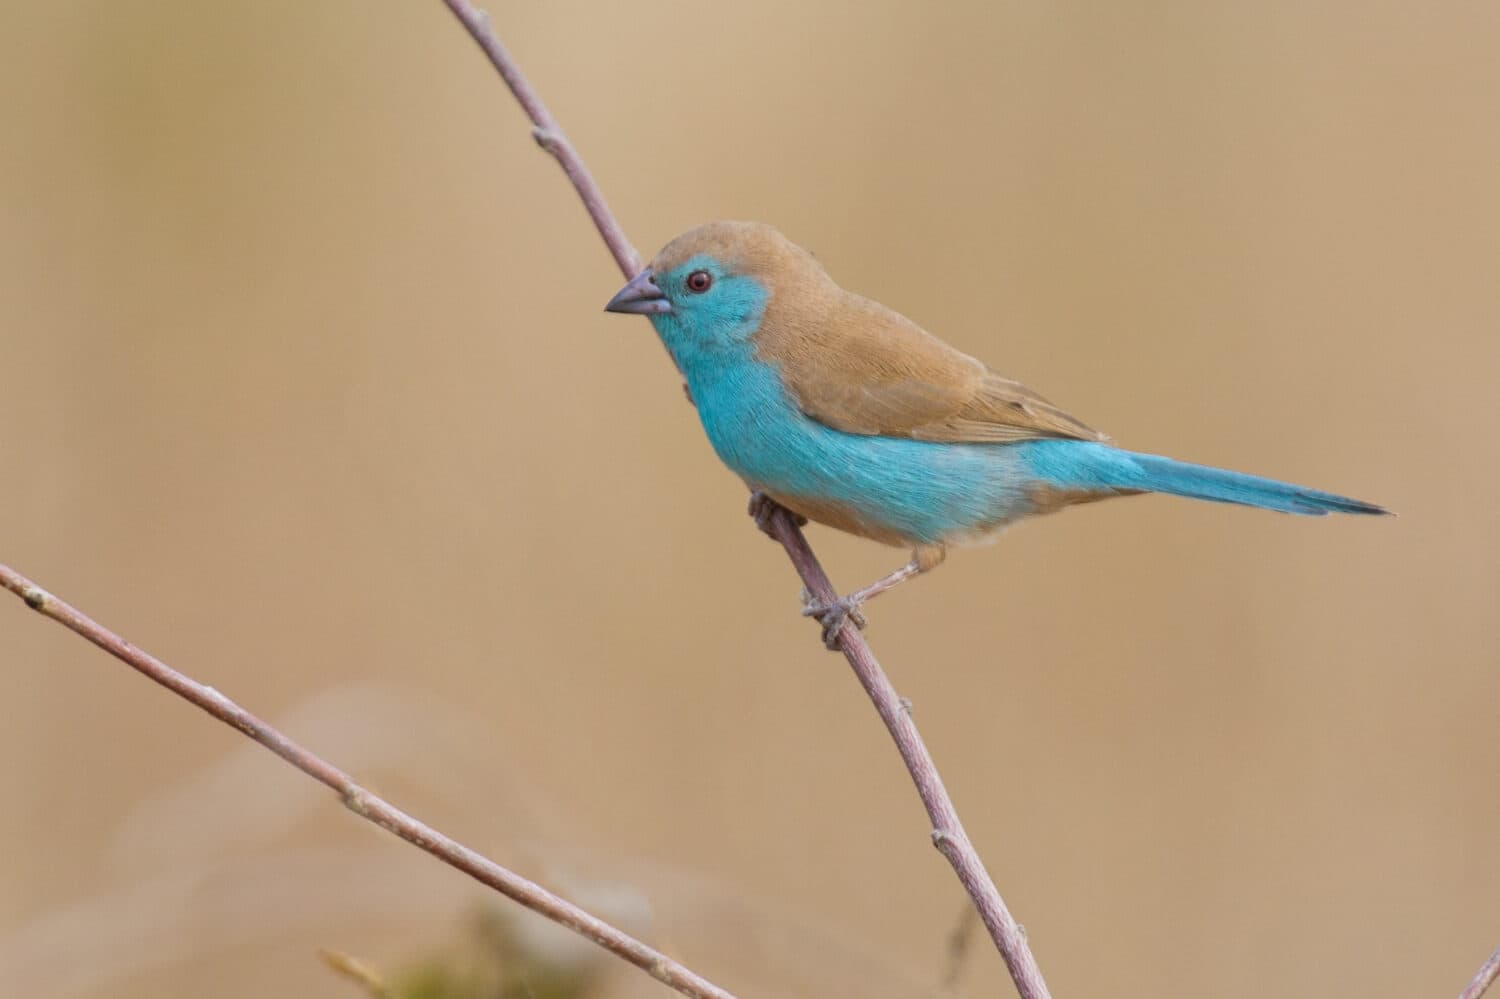 Beautiful blue waxbill sit on a thin branch close-up with lovely background